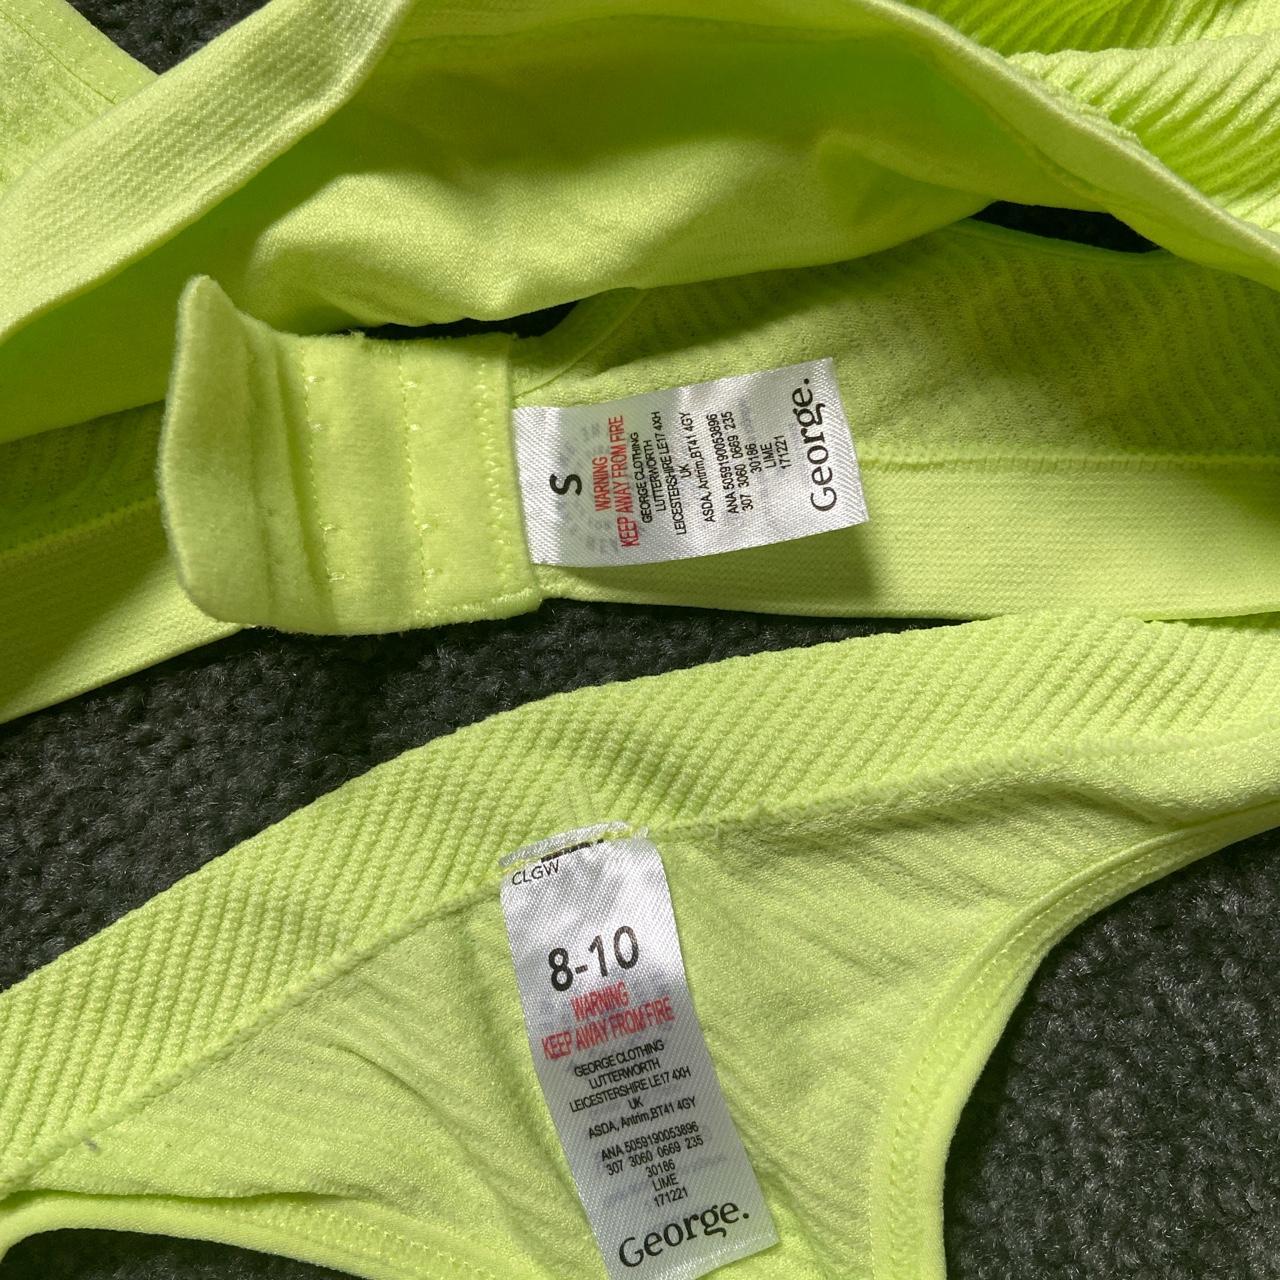 Asda George neon lime green thong and bra set. As new. - Depop